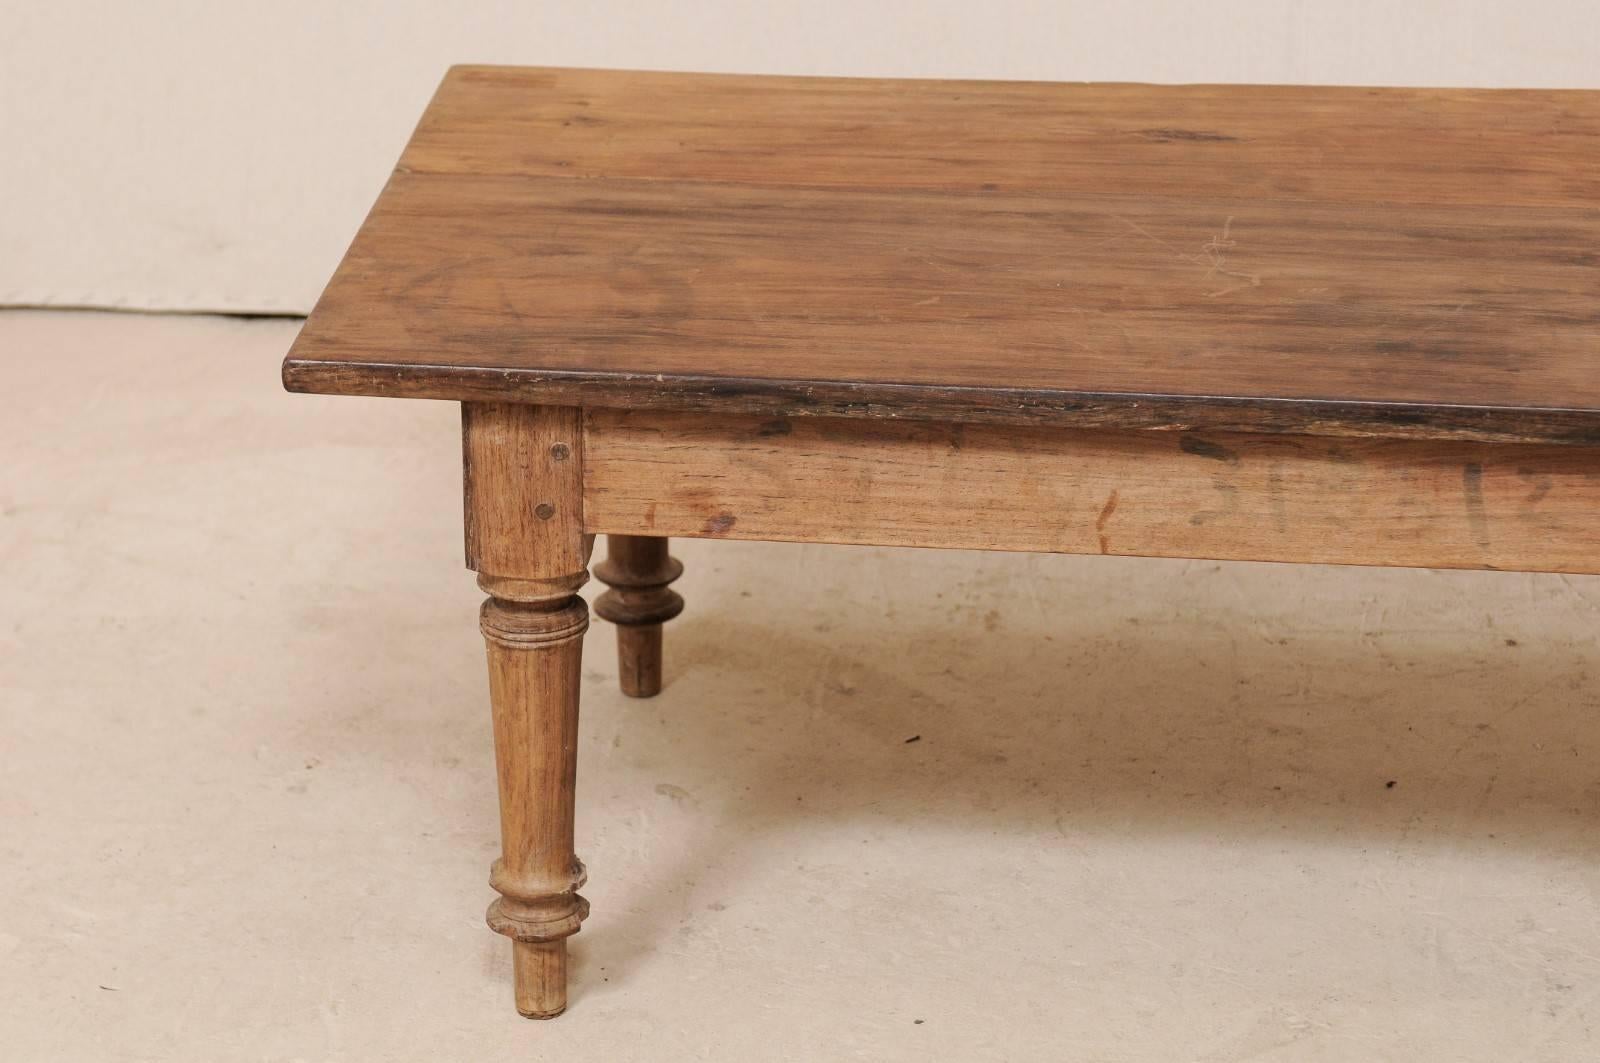 Hardwood Antique Brazilian Wood Table or Bench from the Early 20th Century